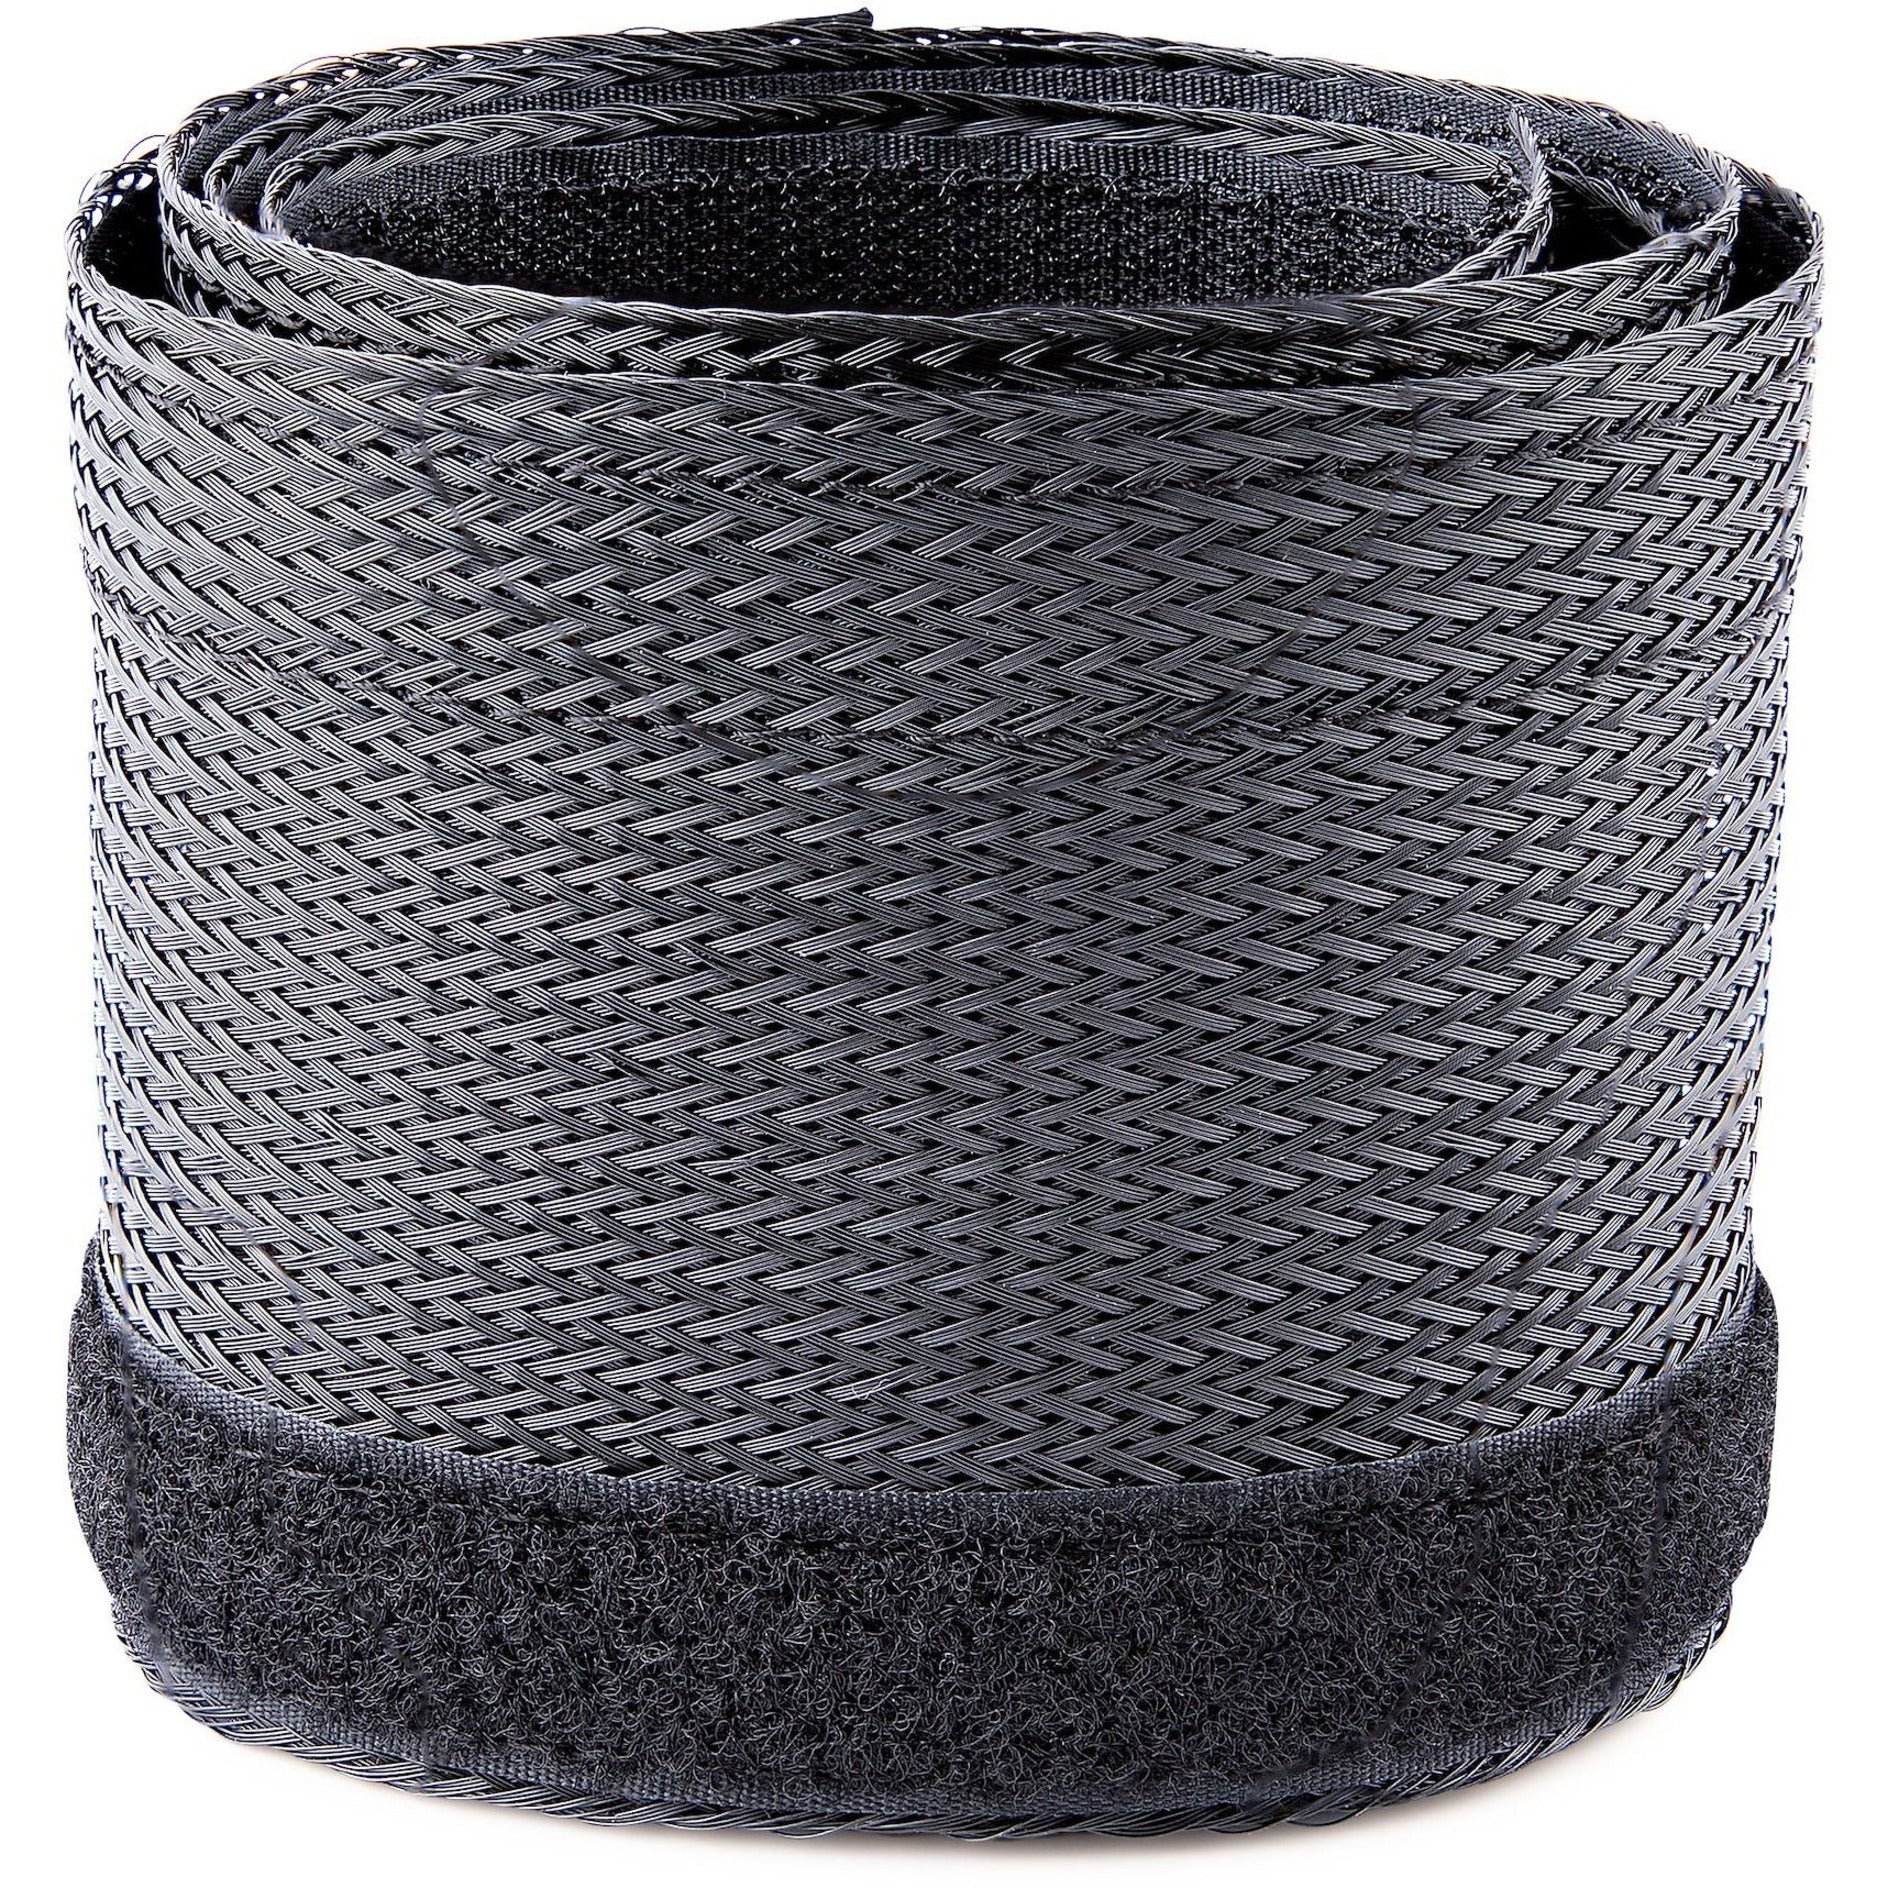 StarTech.com WKSTNCMFLX 10ft Cable Management Sleeve, Braided Mesh Wire Wraps